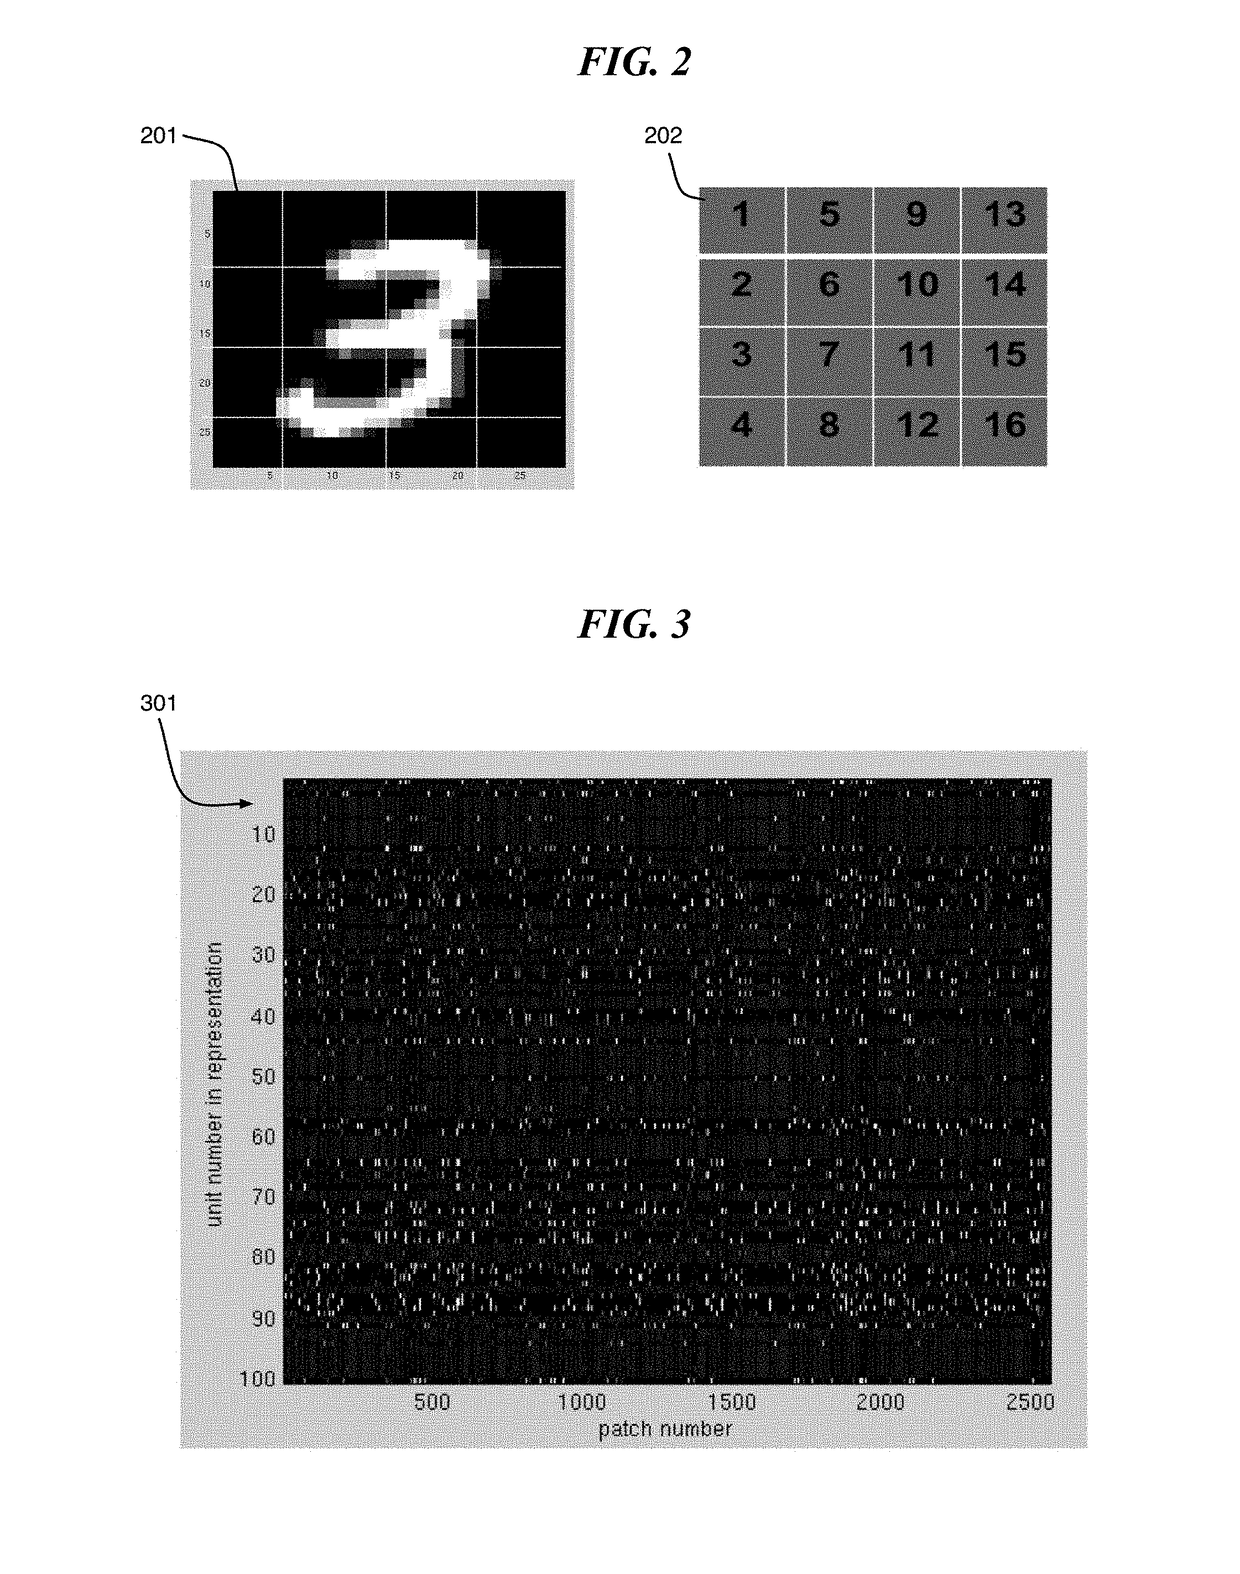 Visual object and event detection and prediction system using saccades